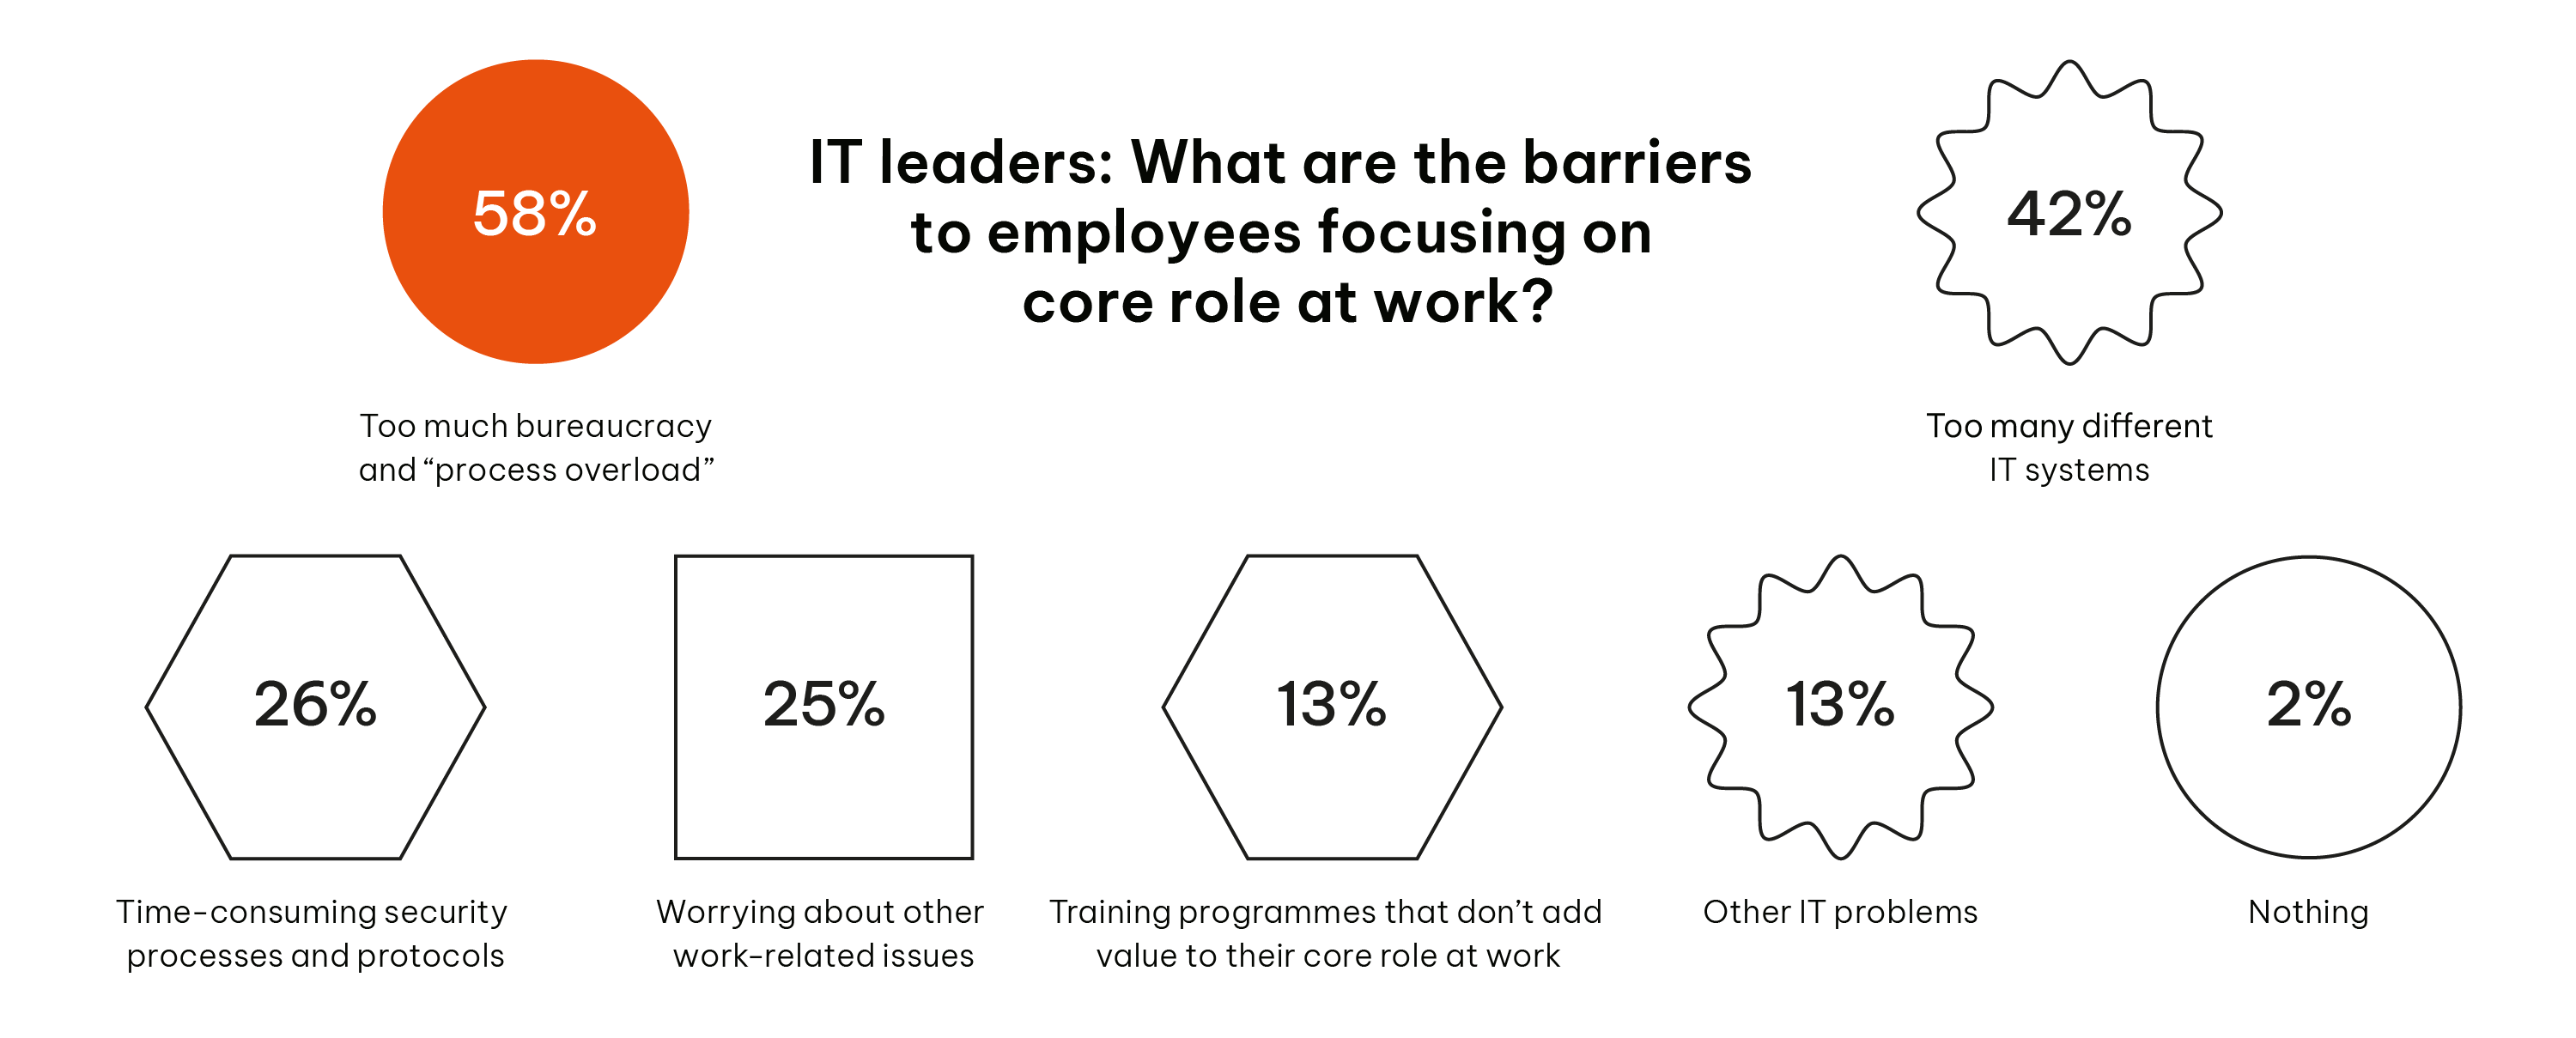 IT_Leaders:_What_are_the_barriers_to_employees_focusing_on_work?_58%_say:_Too_much_bureaucracy_and_